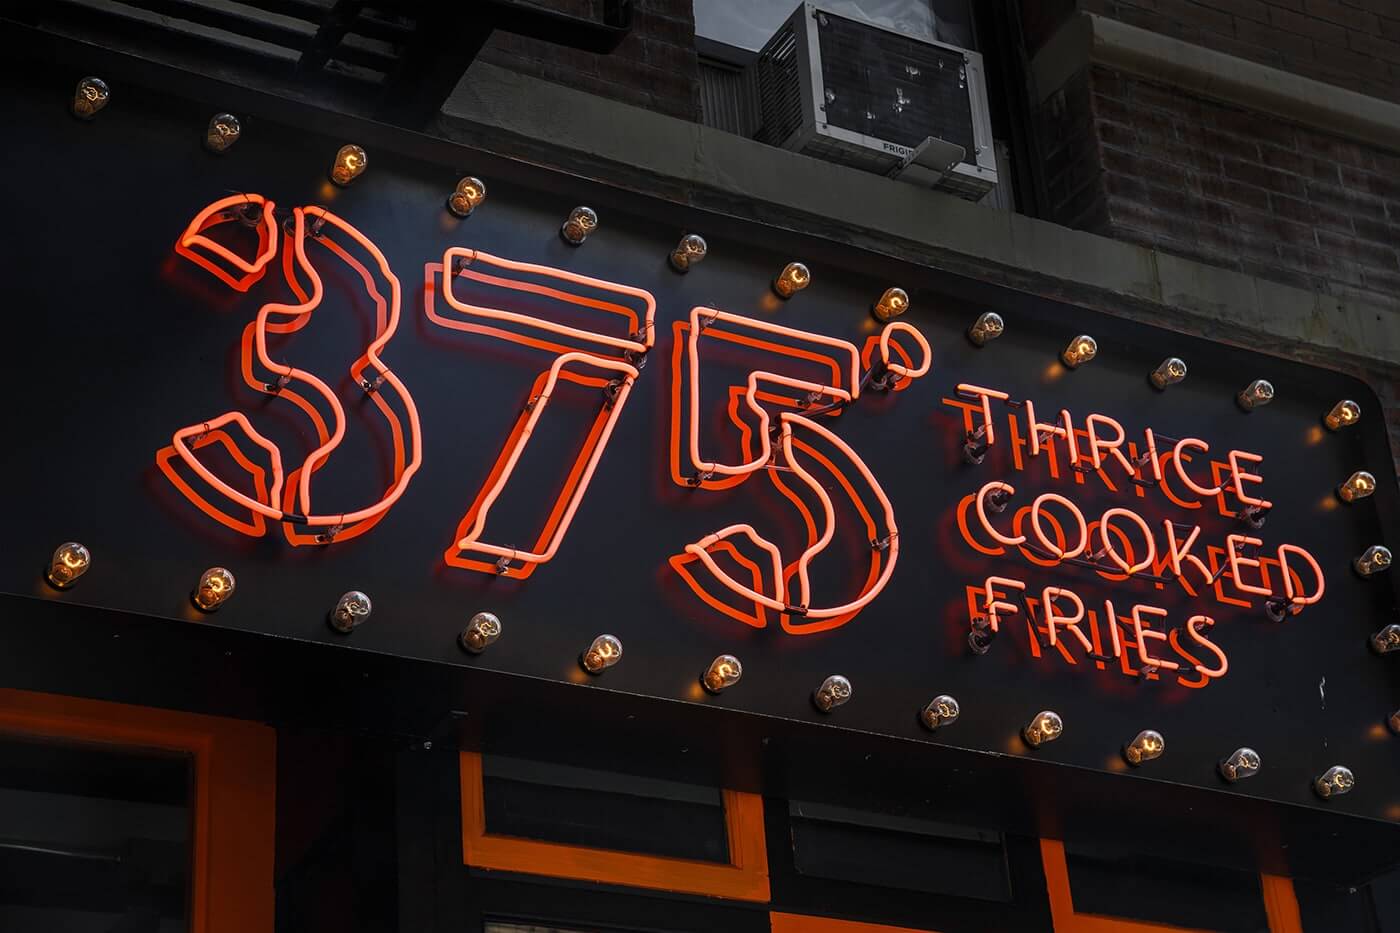 Store signage neon sign in New York for food and beverage brand 375 Chicken and Fries